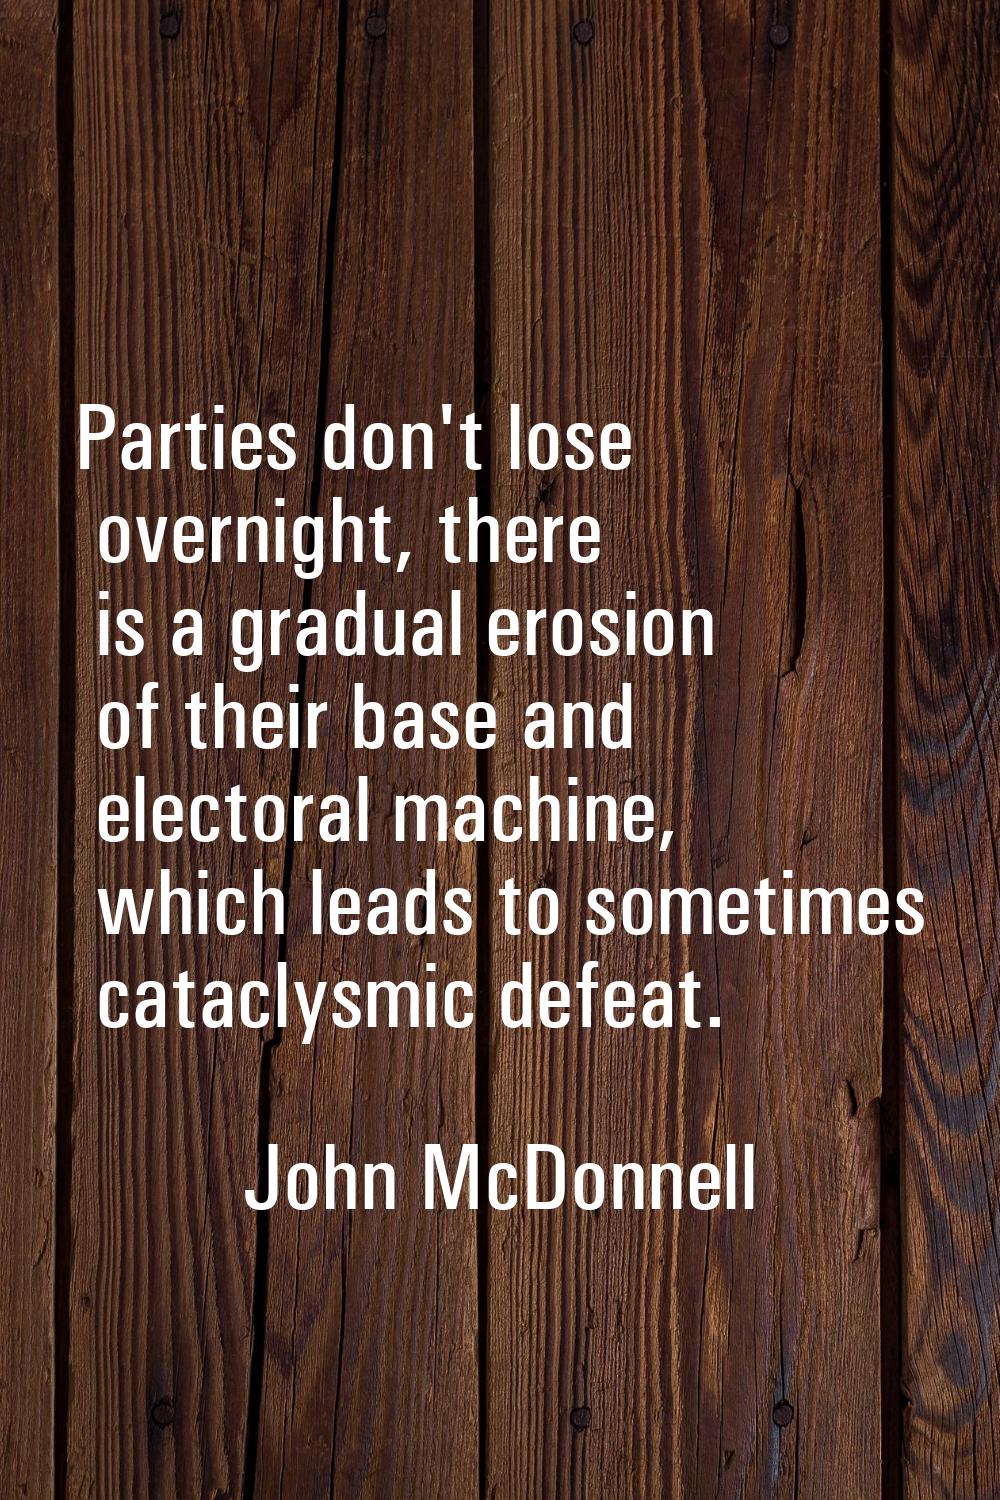 Parties don't lose overnight, there is a gradual erosion of their base and electoral machine, which